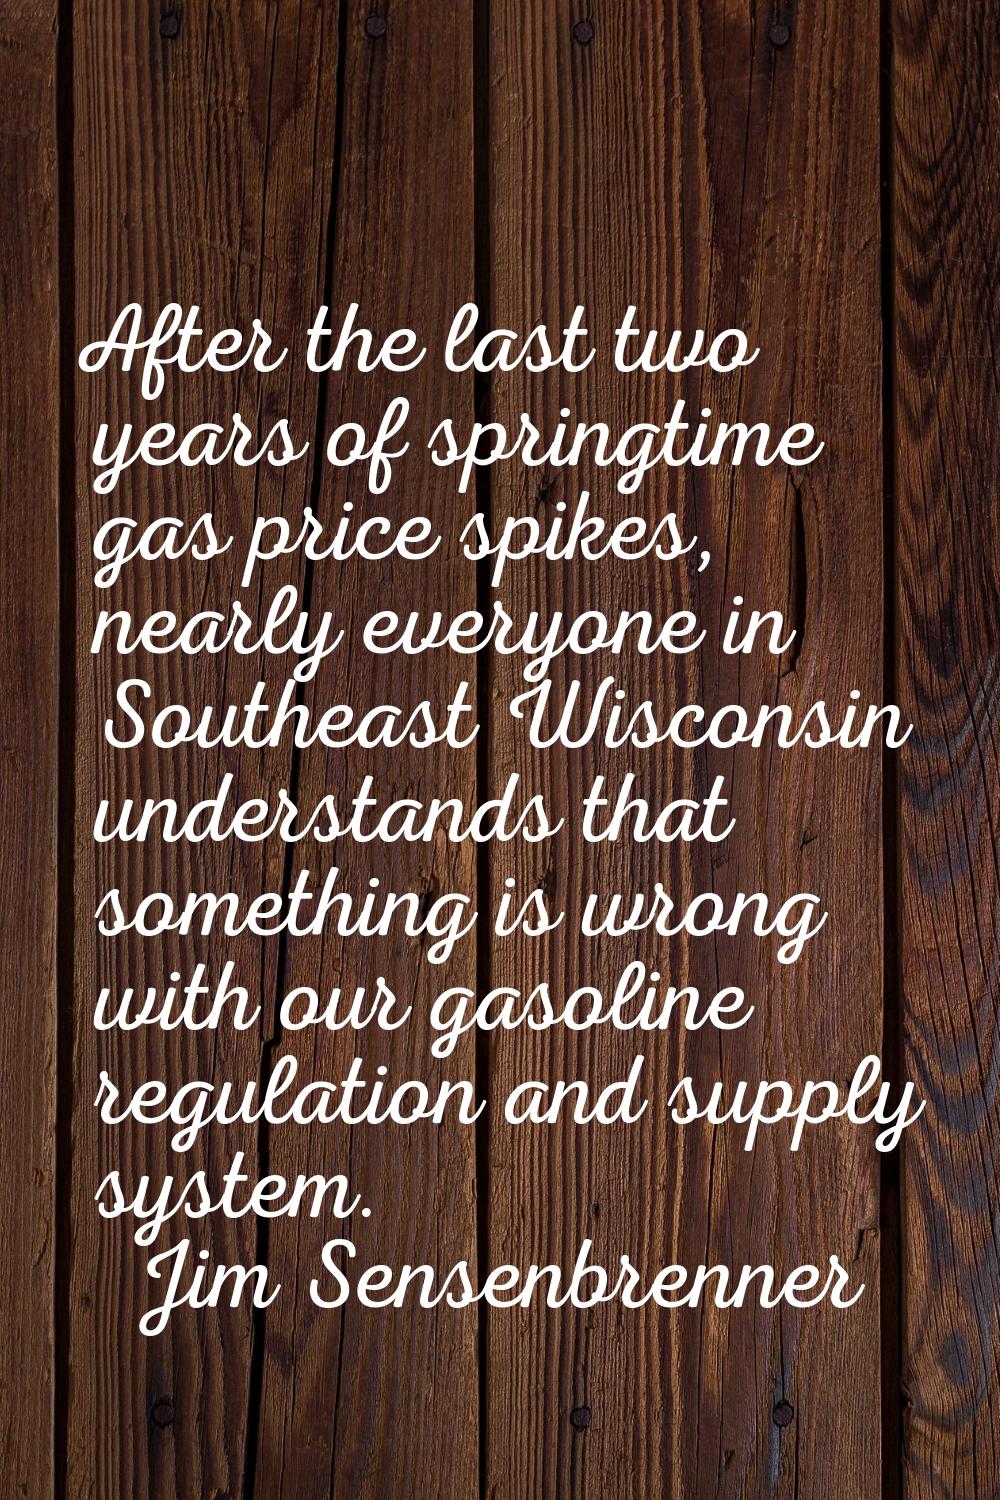 After the last two years of springtime gas price spikes, nearly everyone in Southeast Wisconsin und